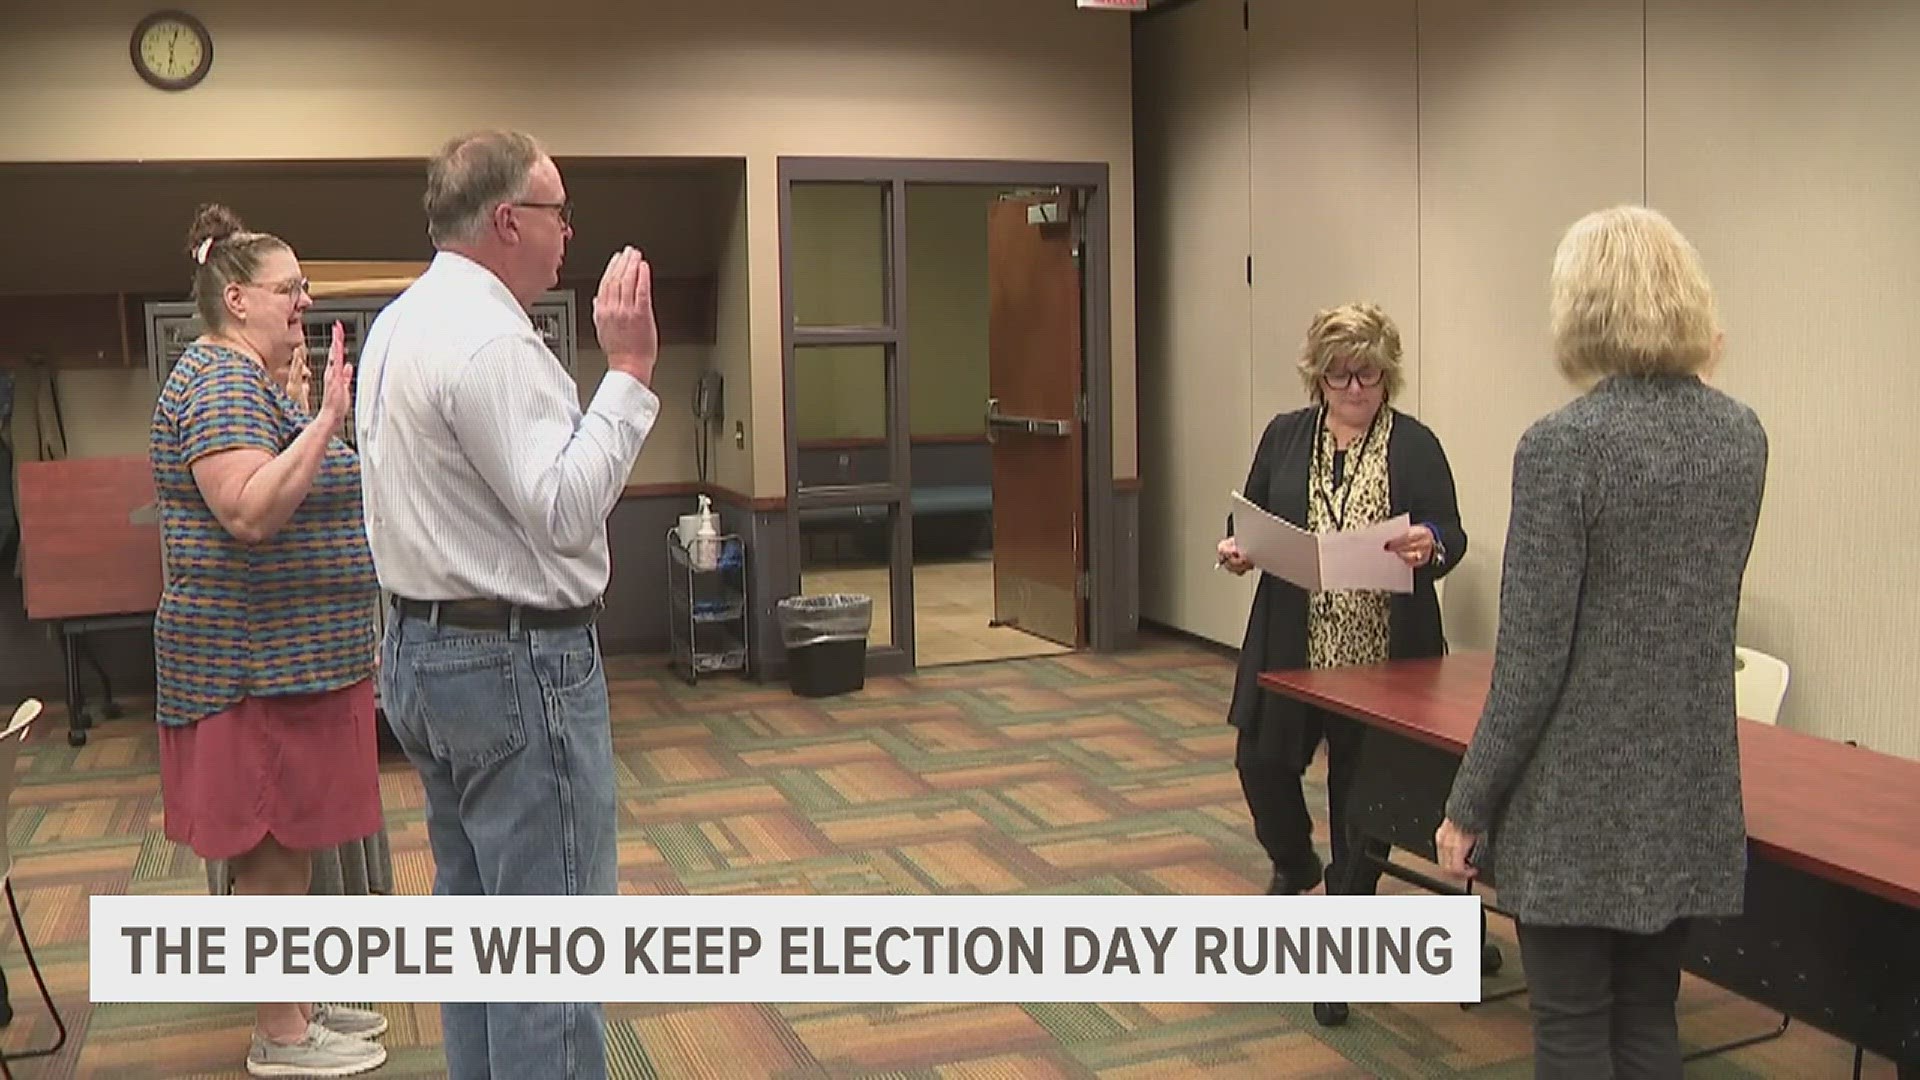 Visit WQAD.com to find out how you can become a poll worker for the next election.